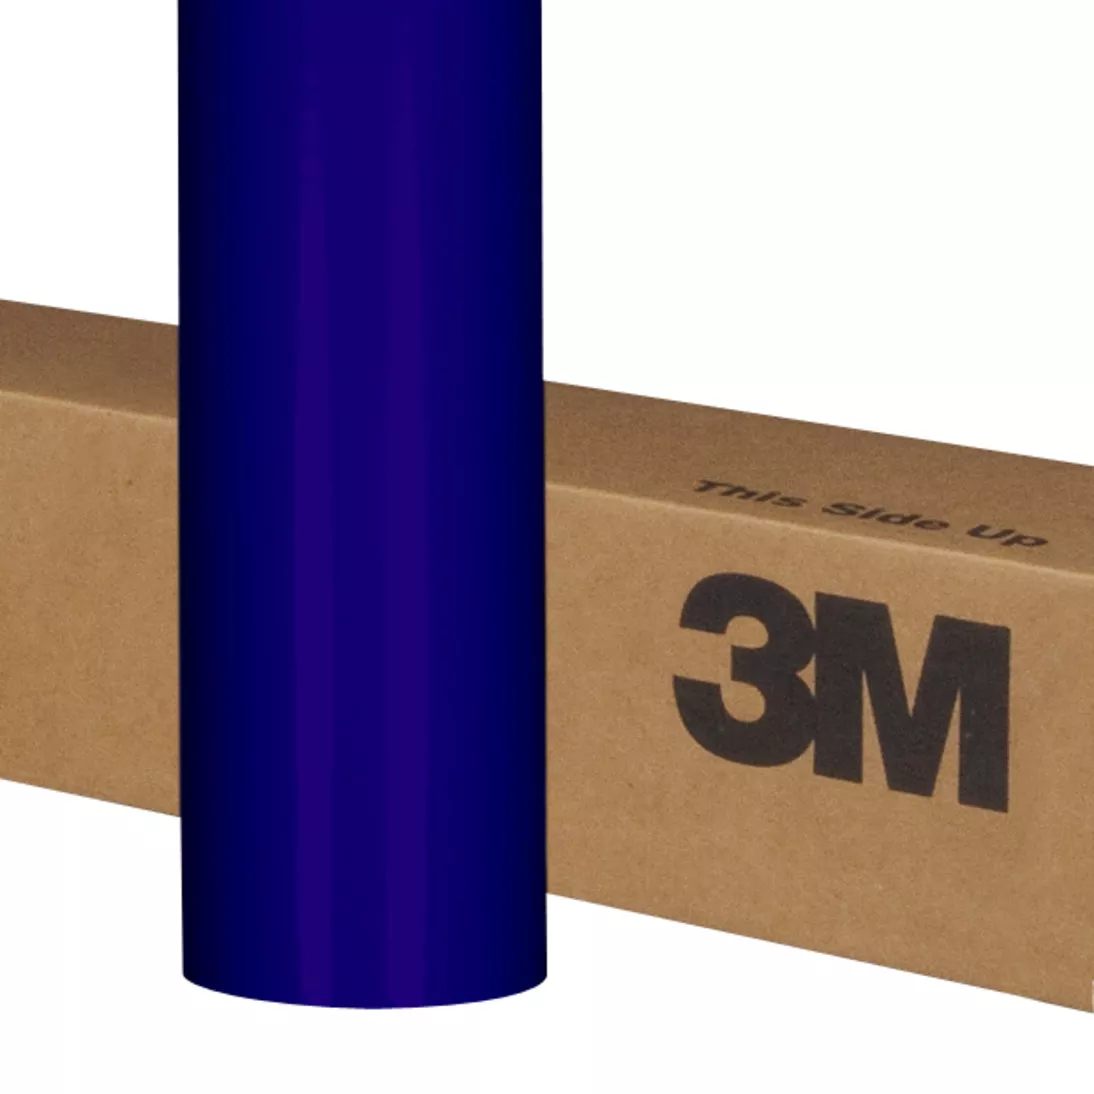 3M™ Scotchcal™ Translucent Graphic Film 3630-087, Royal Blue, 48 in x 50 yd